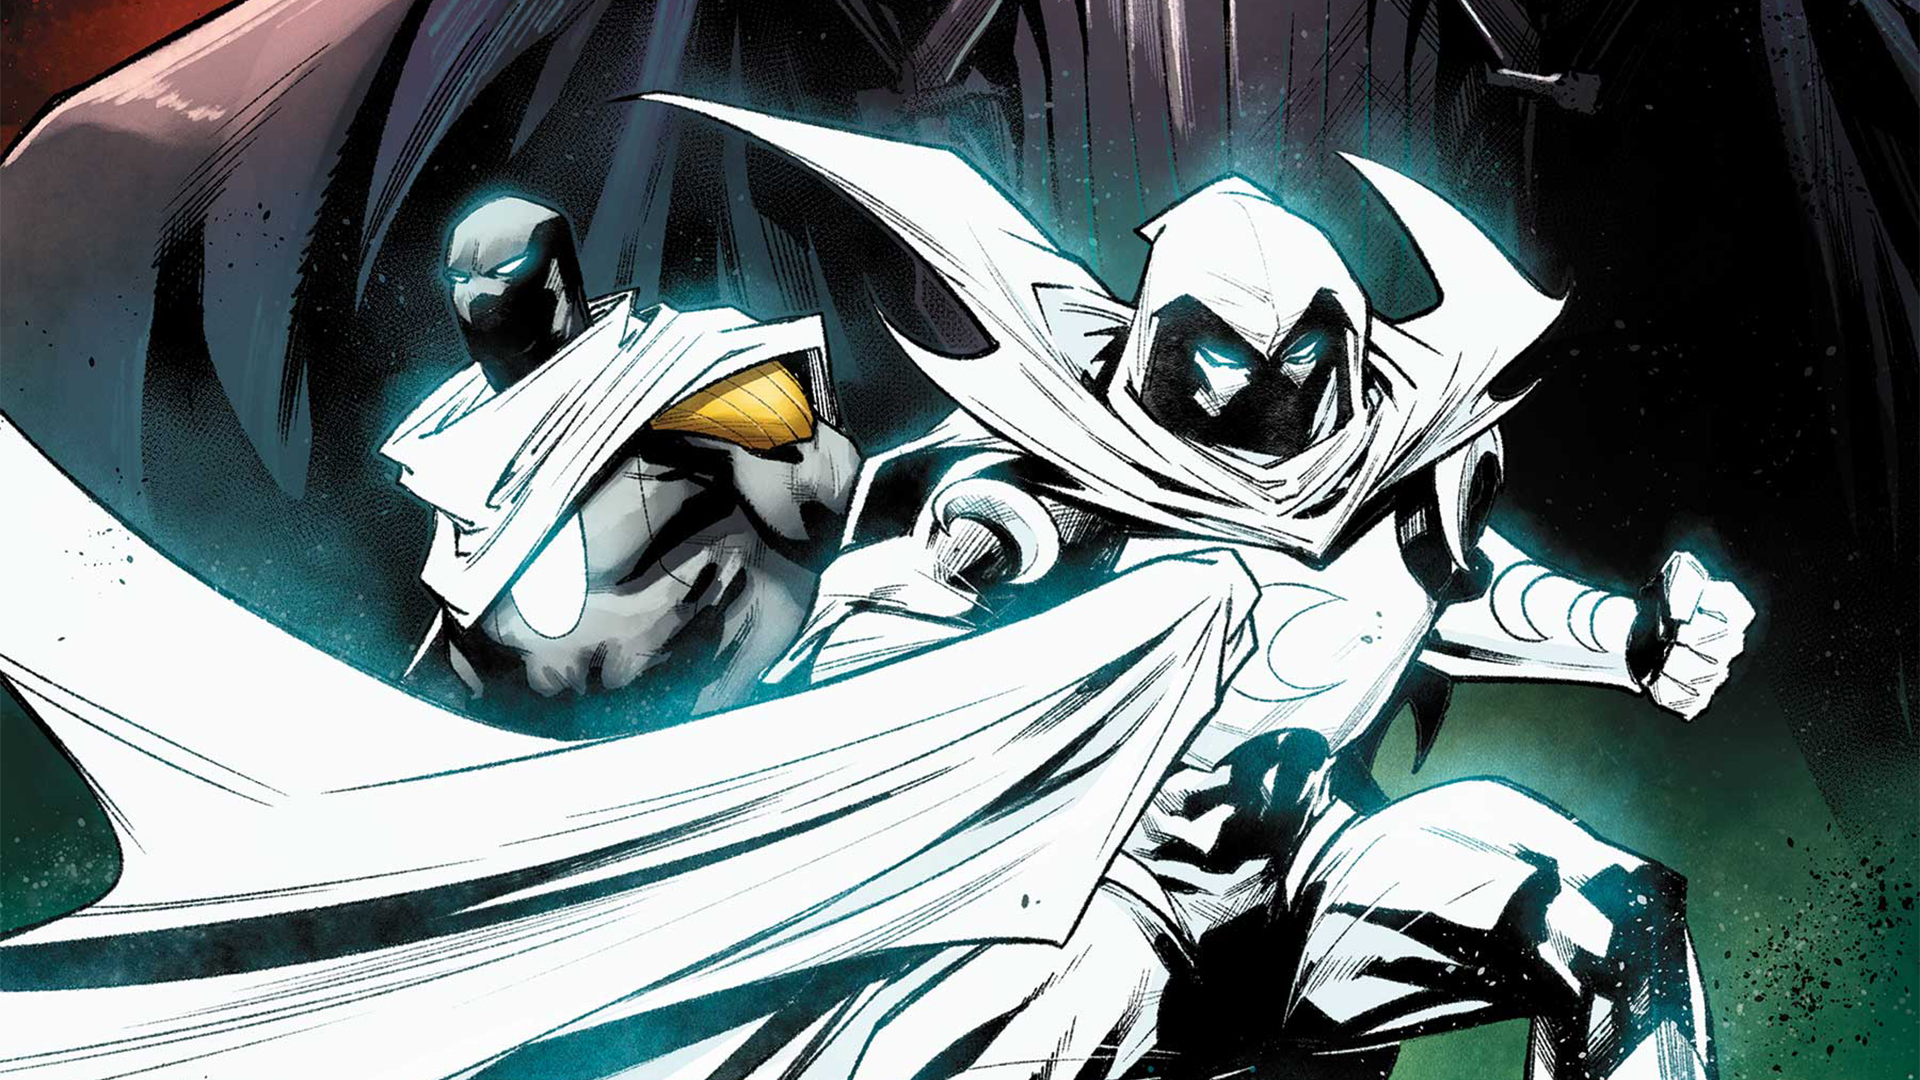 Meet the new Moon Knight who will replace Marc Spector